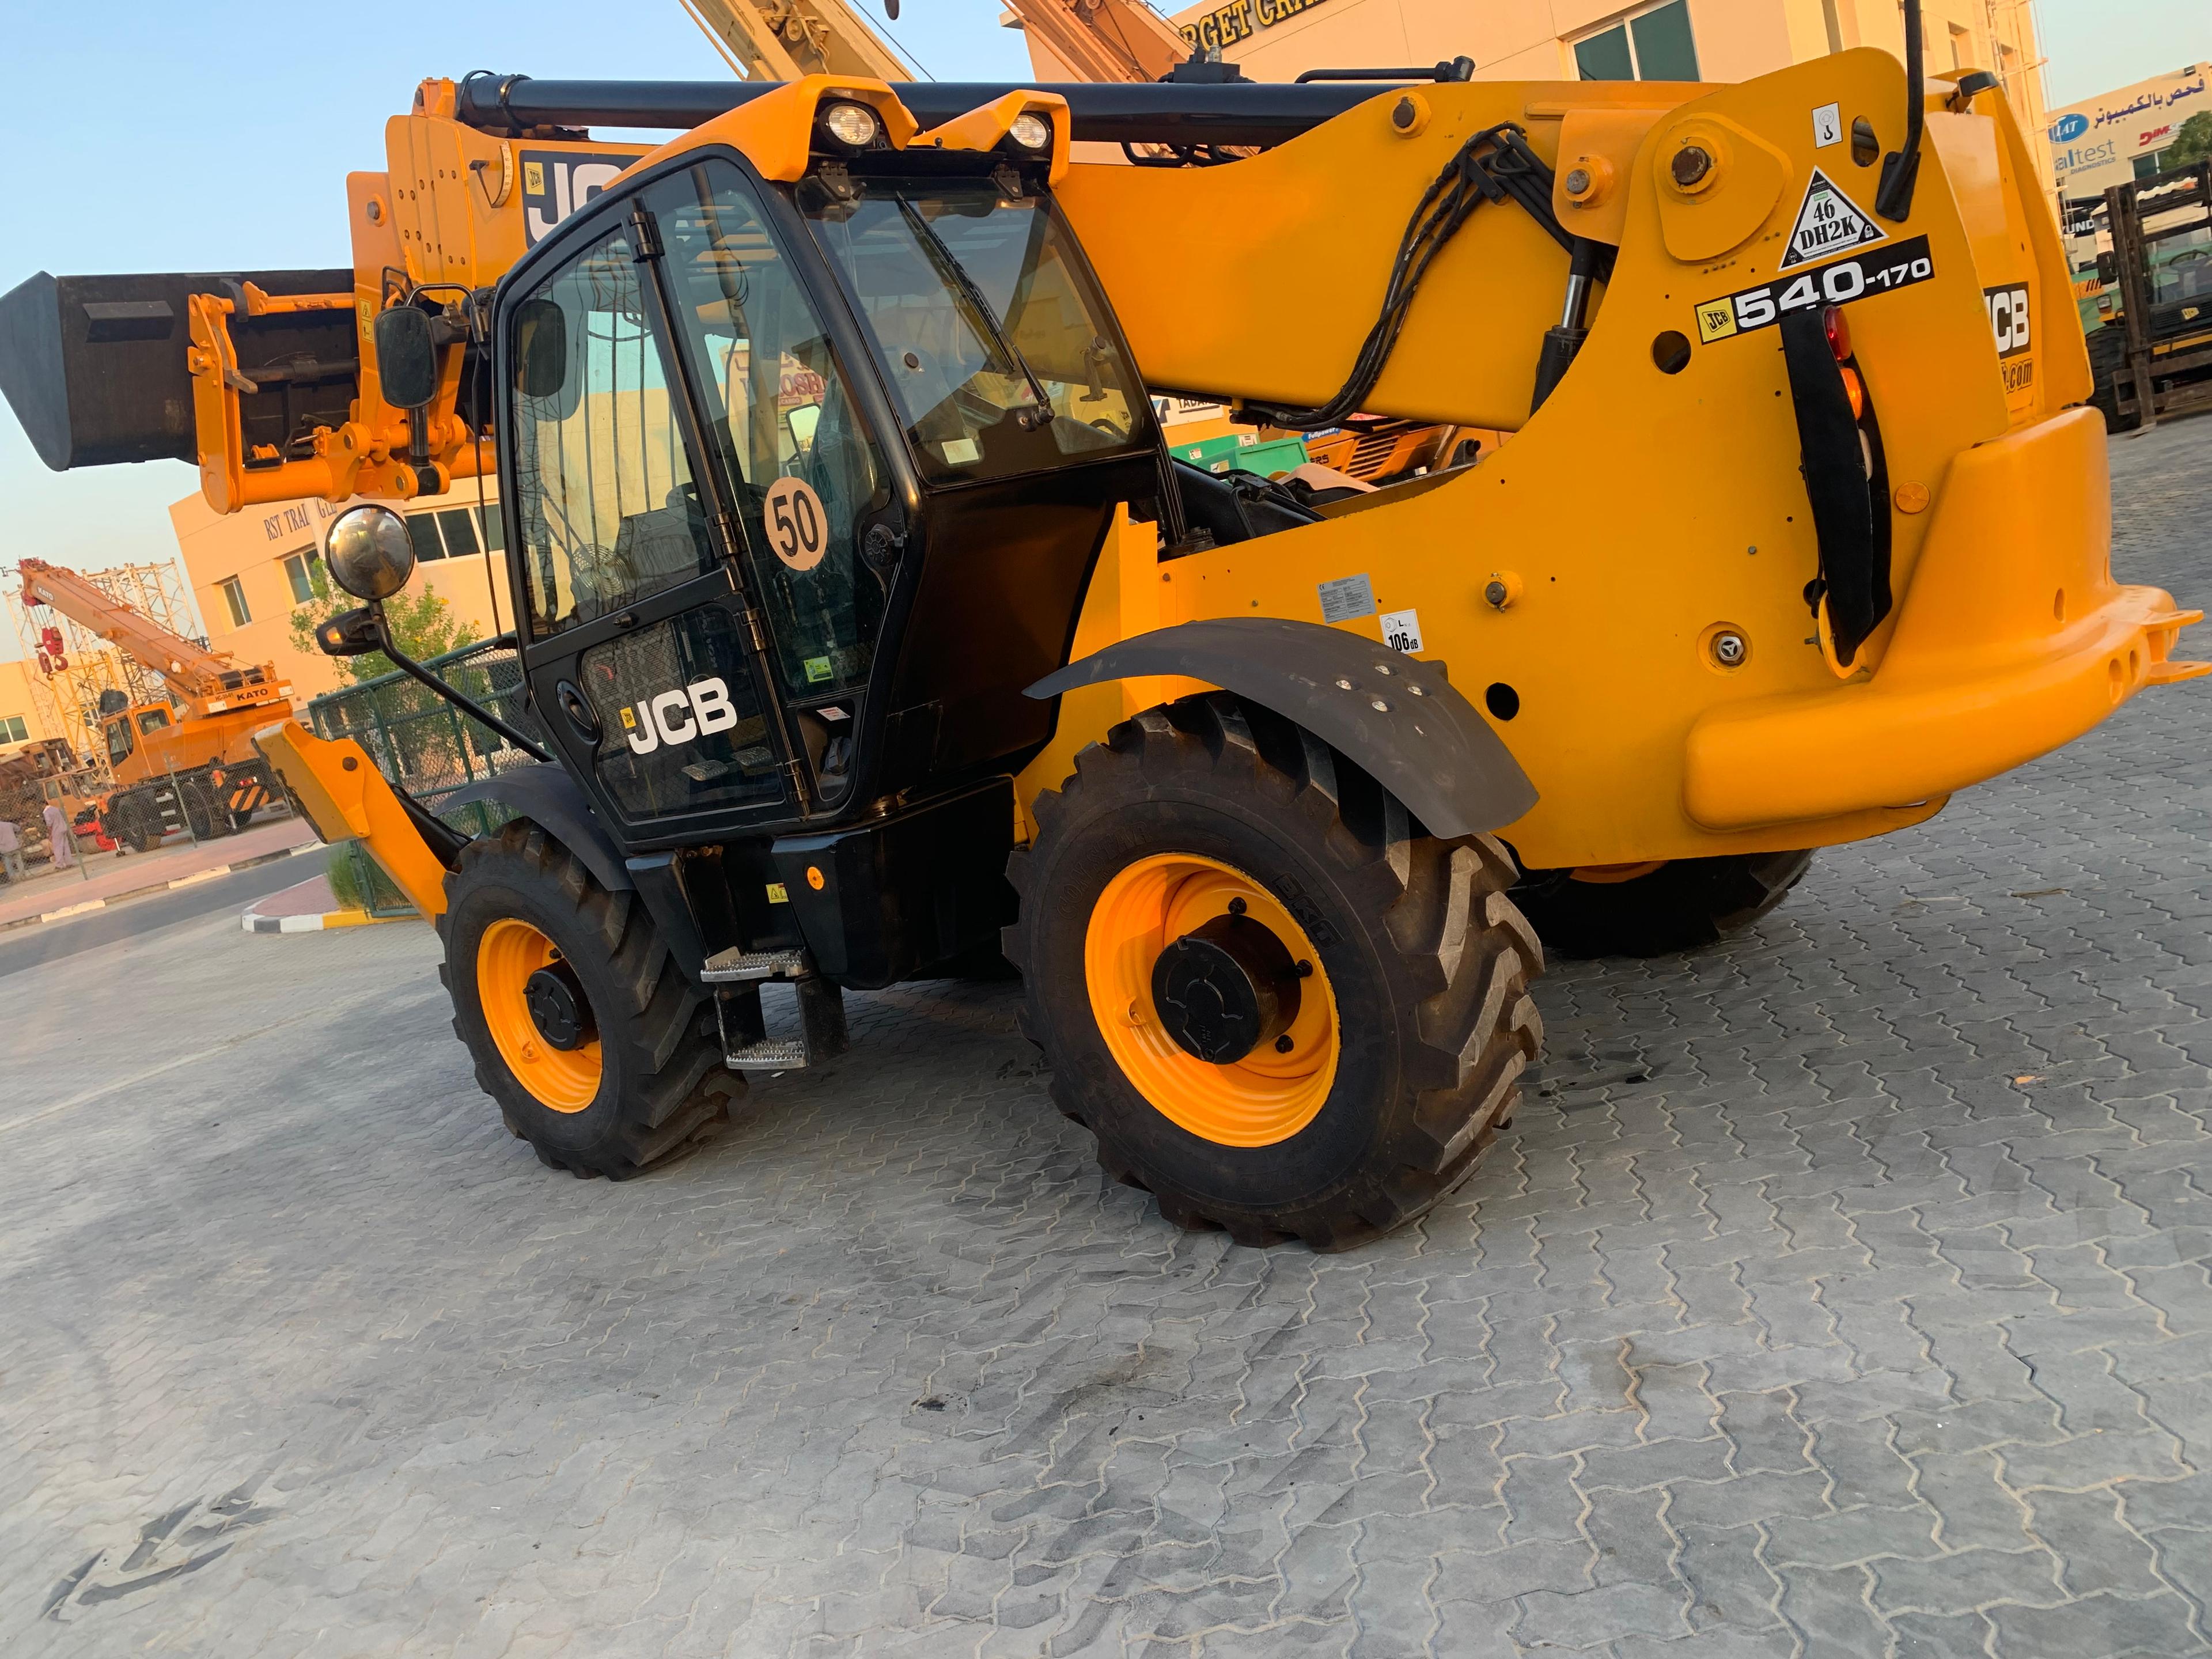 Ads For sale jcb 540-170 model 2013 in good condition